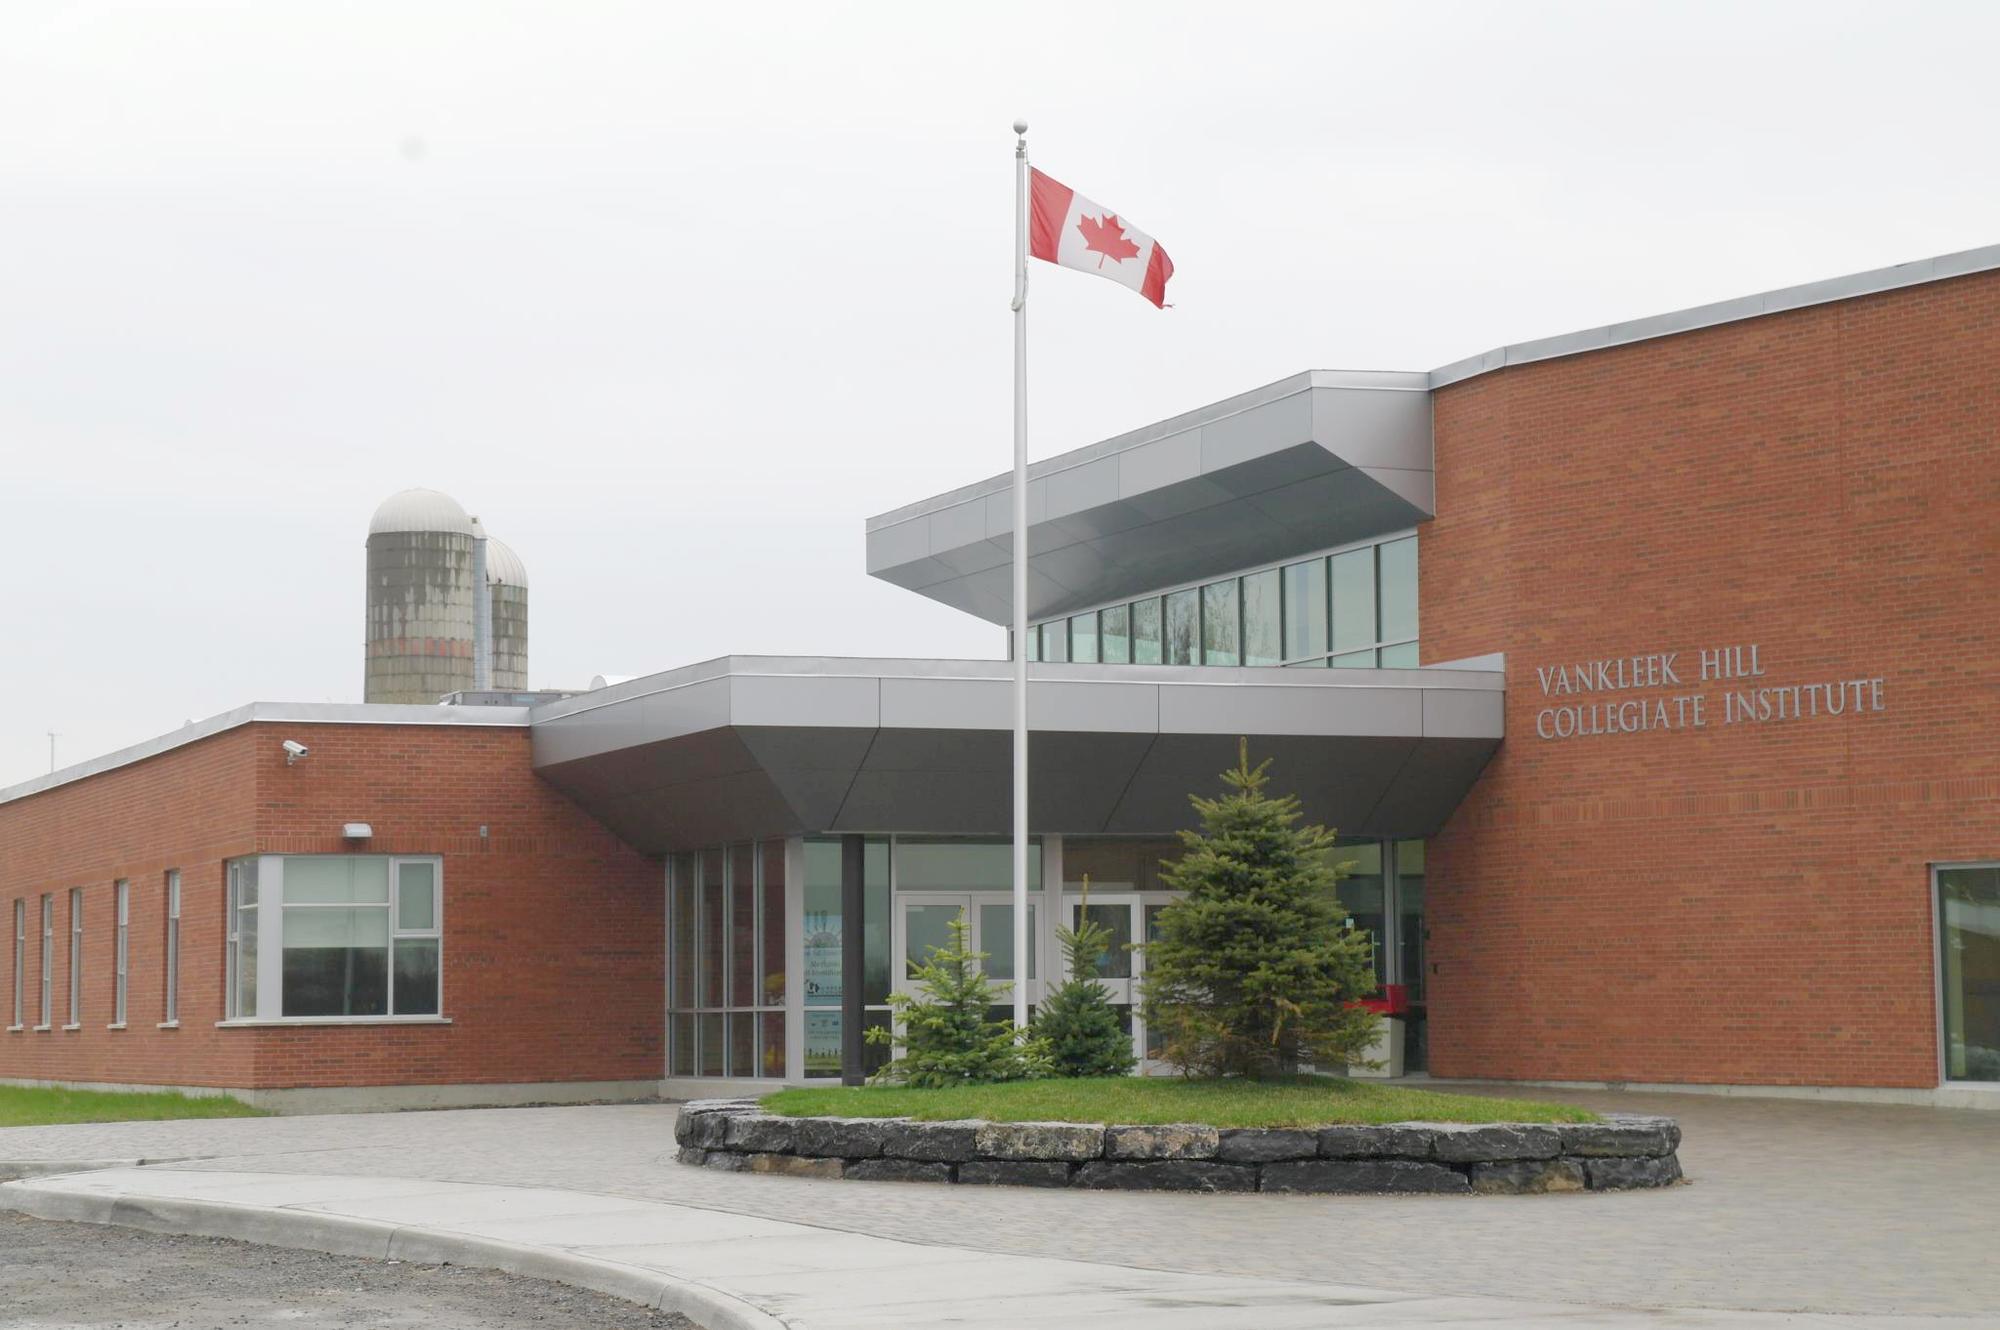 Nomination period open for Vankleek Hill Collegiate Institute Wall of Fame